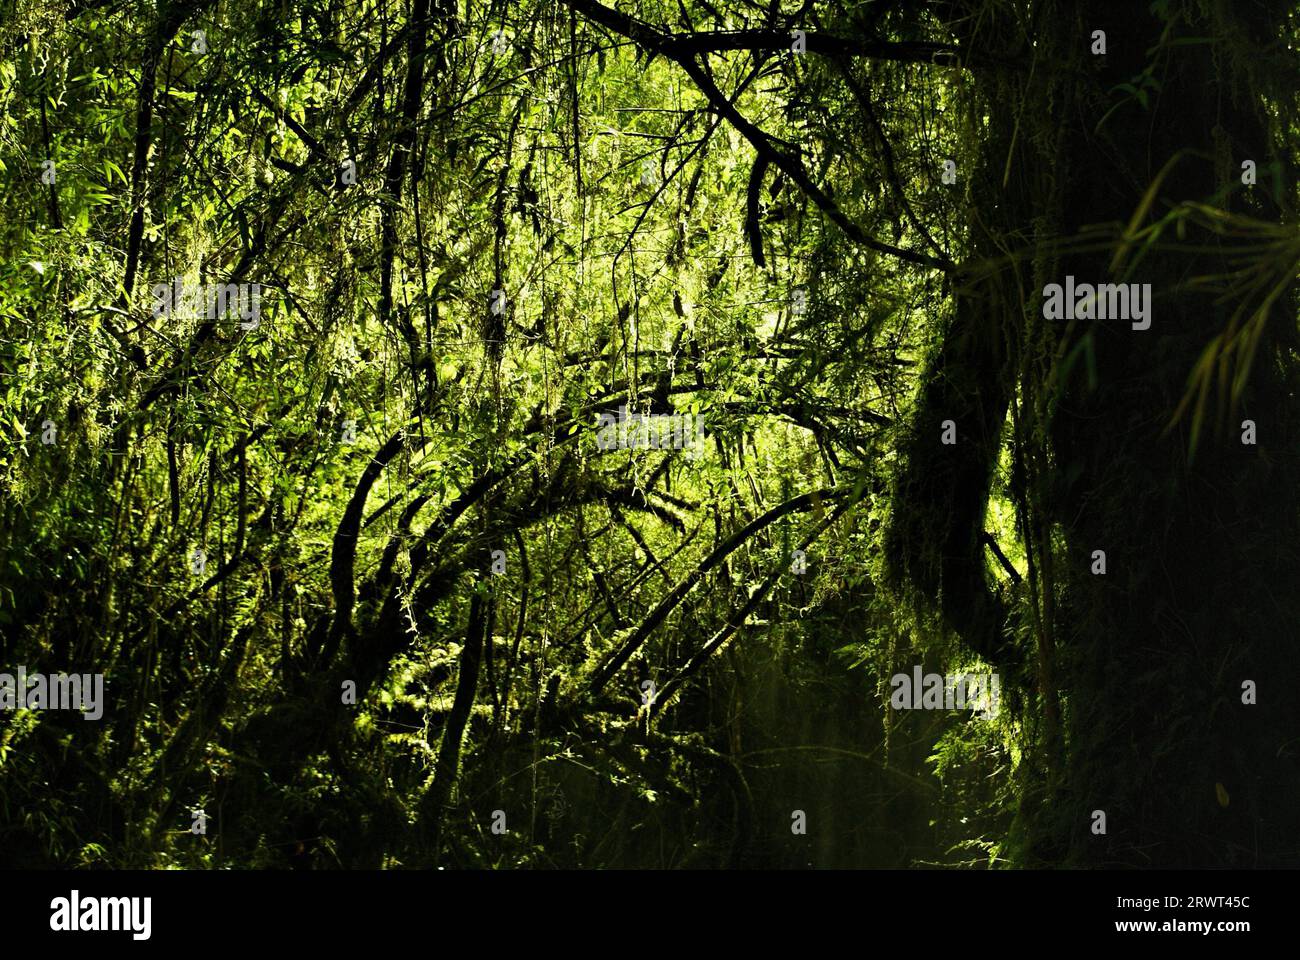 Picturesque view of forest plunged into darkness by dense branches in Alerce Andino national park Stock Photo